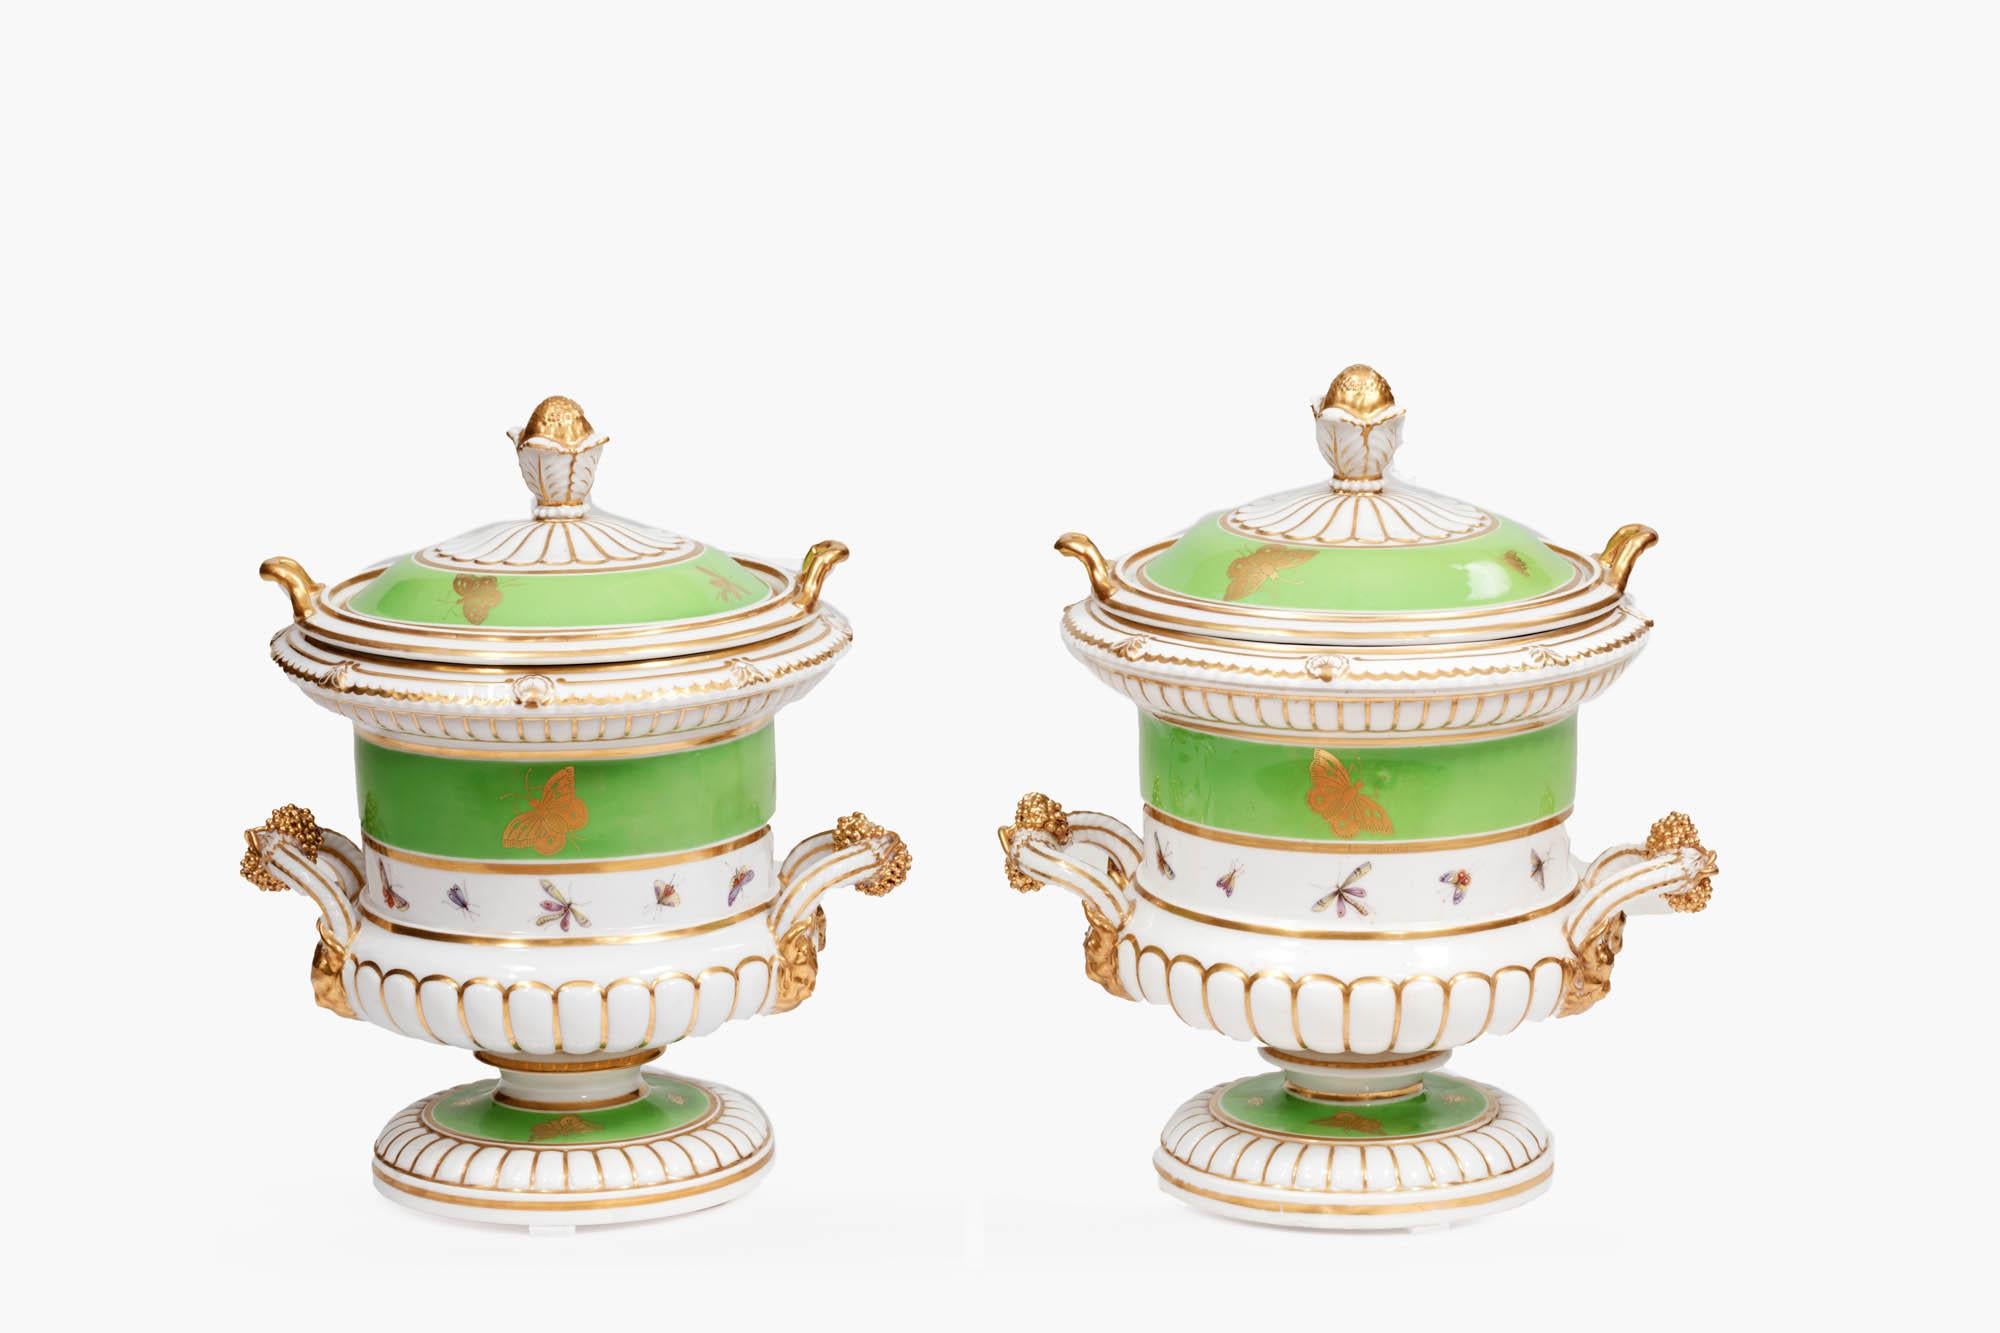 Pair of 19th century green and white ice pails by Chamberlain of Worcester decorated with gold and featuring delicate insect motifs, topped with acorn-style finals. circa 1810.

In the late 18th century Robert Chamberlain, established his own